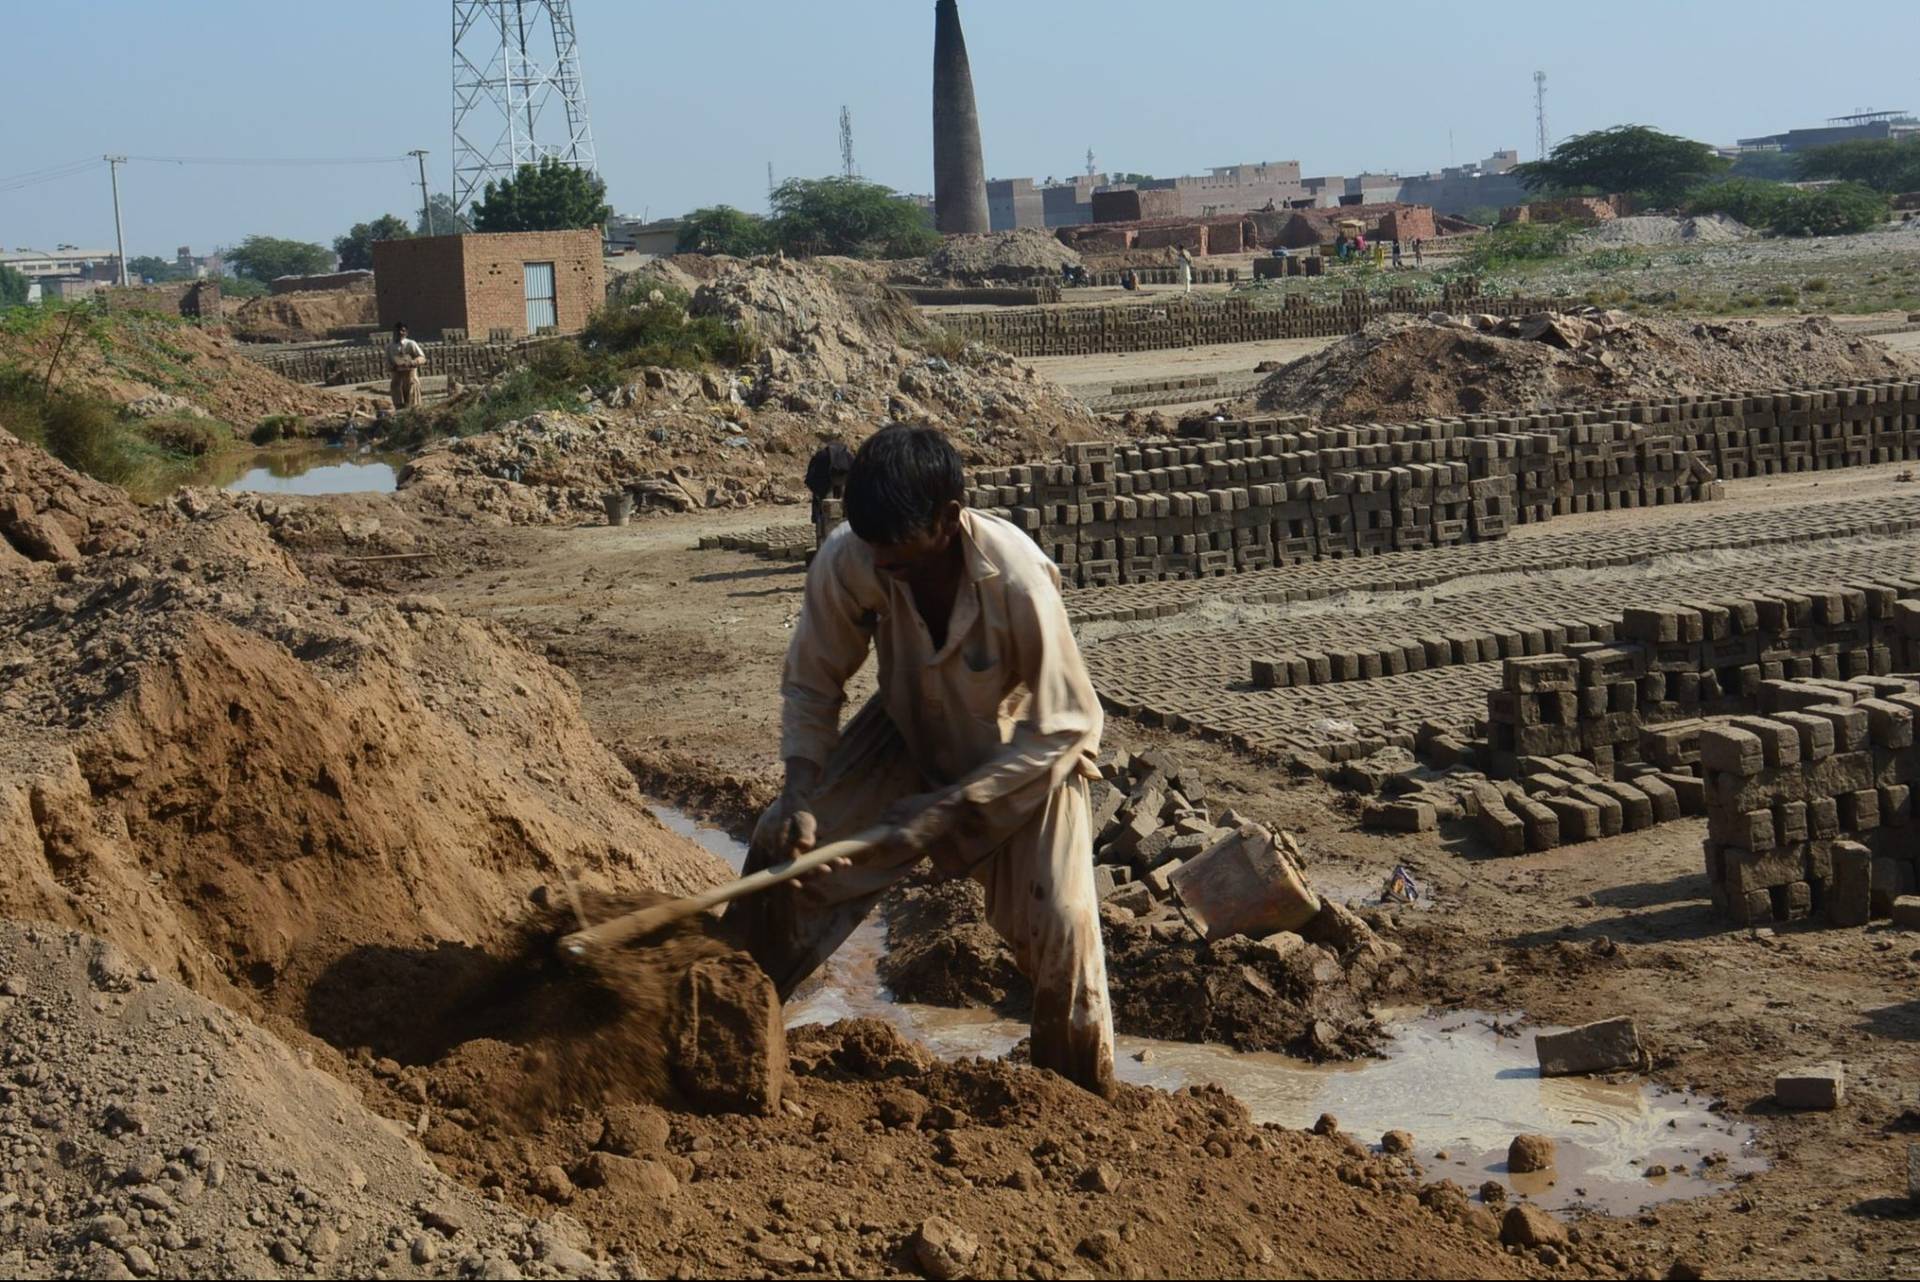 A kiln worker in Pakistan. (Credit: Aid to the Church in Need.)